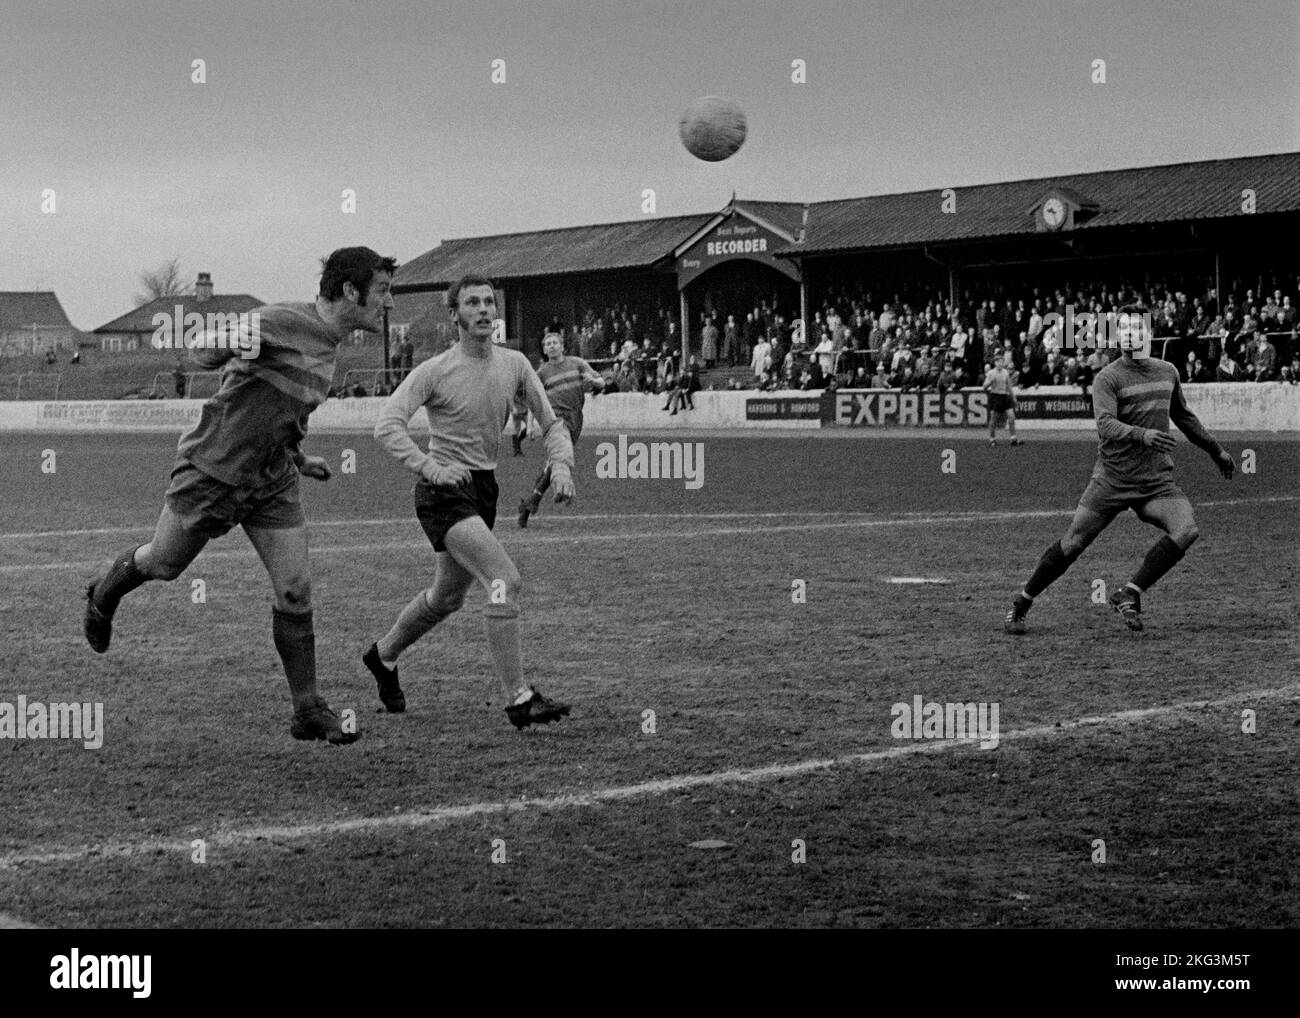 Romford FC v Barnet FC 21 March 1970 at Brooklands Sports Ground Romford Essex UK Southern League Prtemier Division Scans made in 2022 Stock Photo